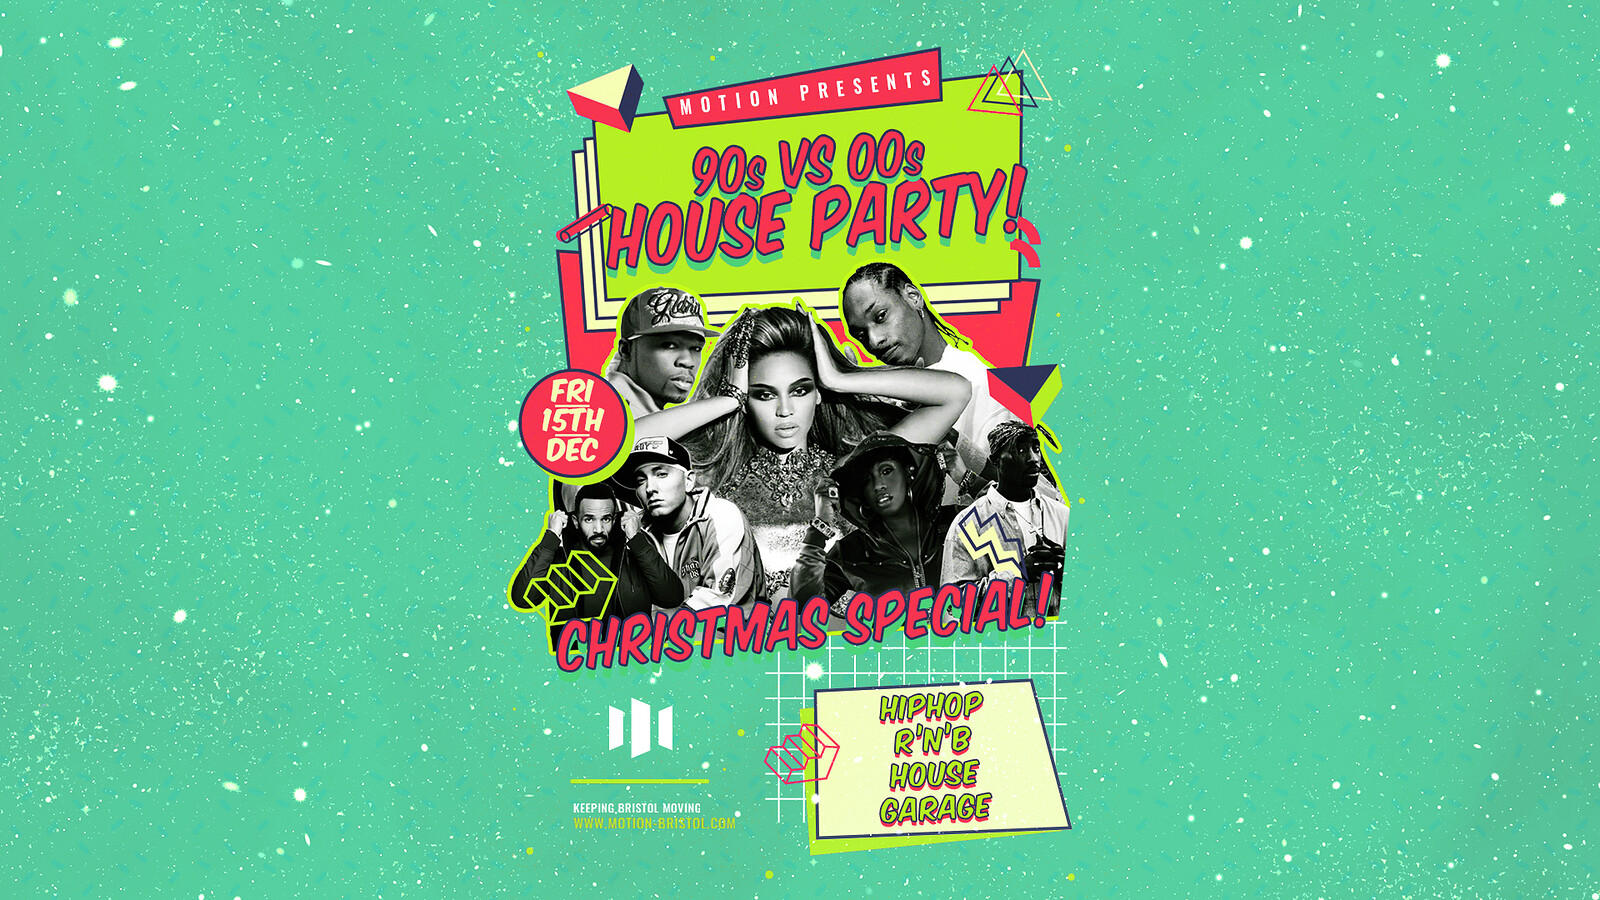 Motion's 90s vs 00s House Party - Xmas Special at Motion